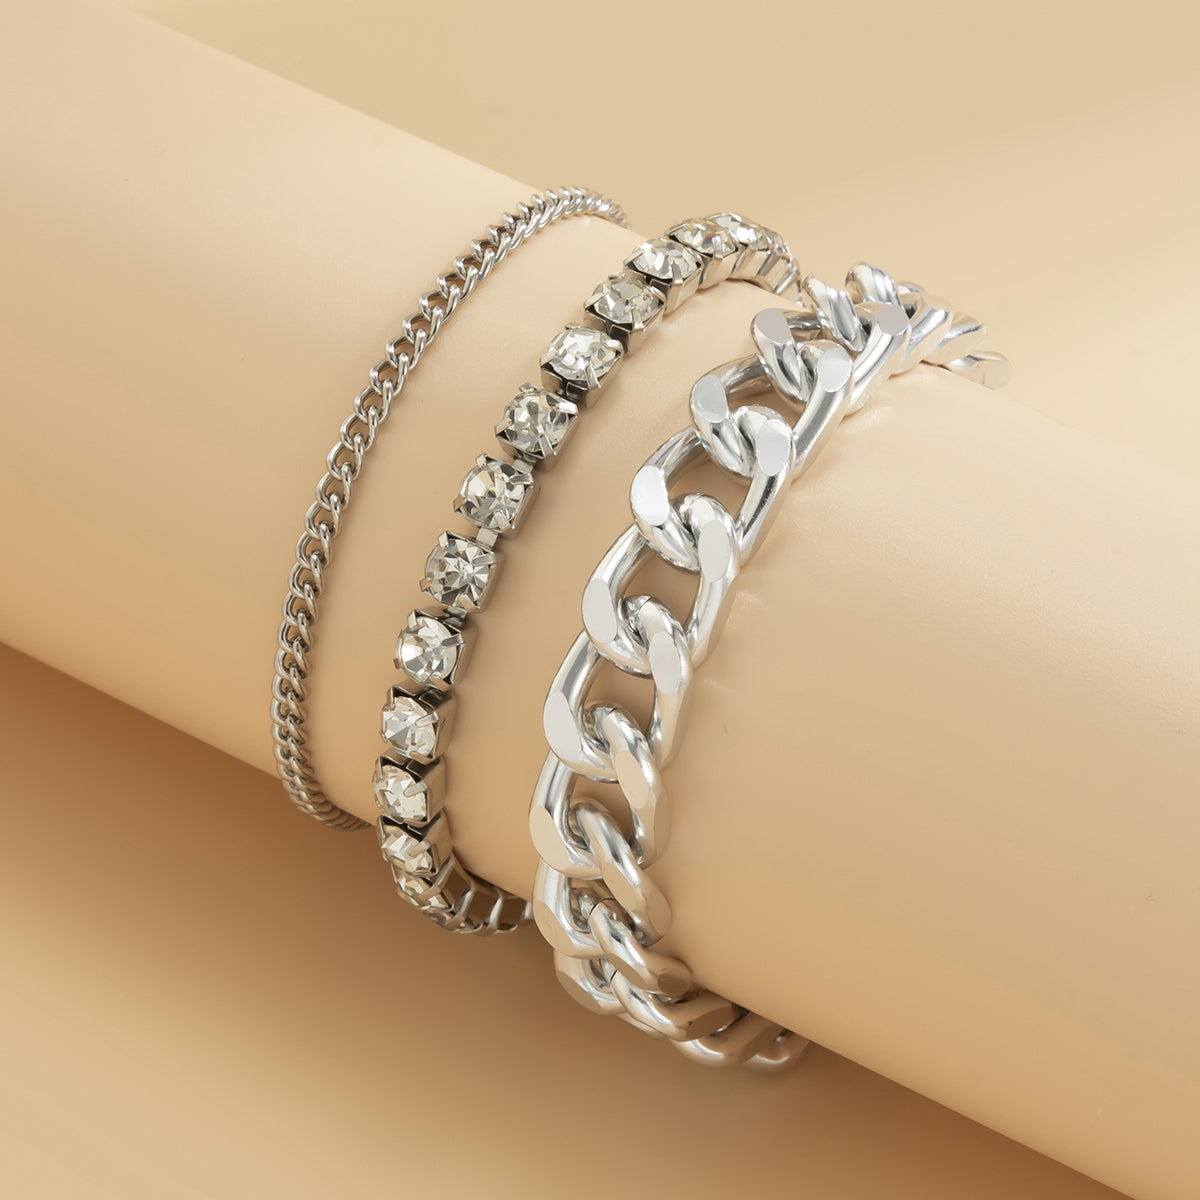 Cubic Zirconia & Silver-Plated Curb Chain Bracelet Set